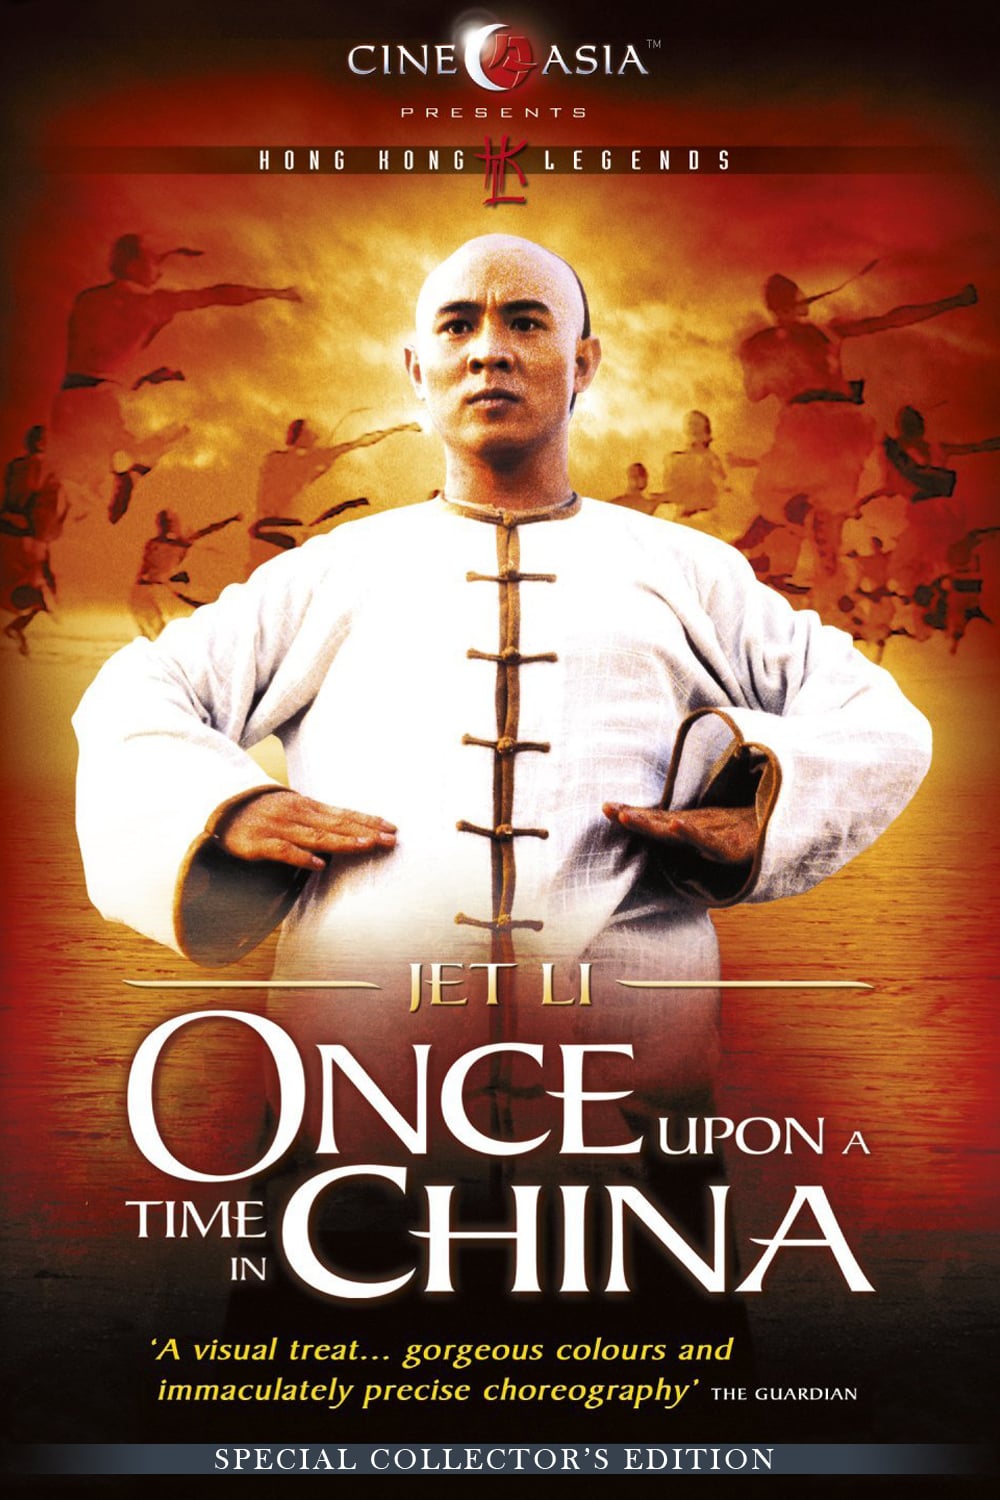 Plakat von "Once Upon a Time in China"